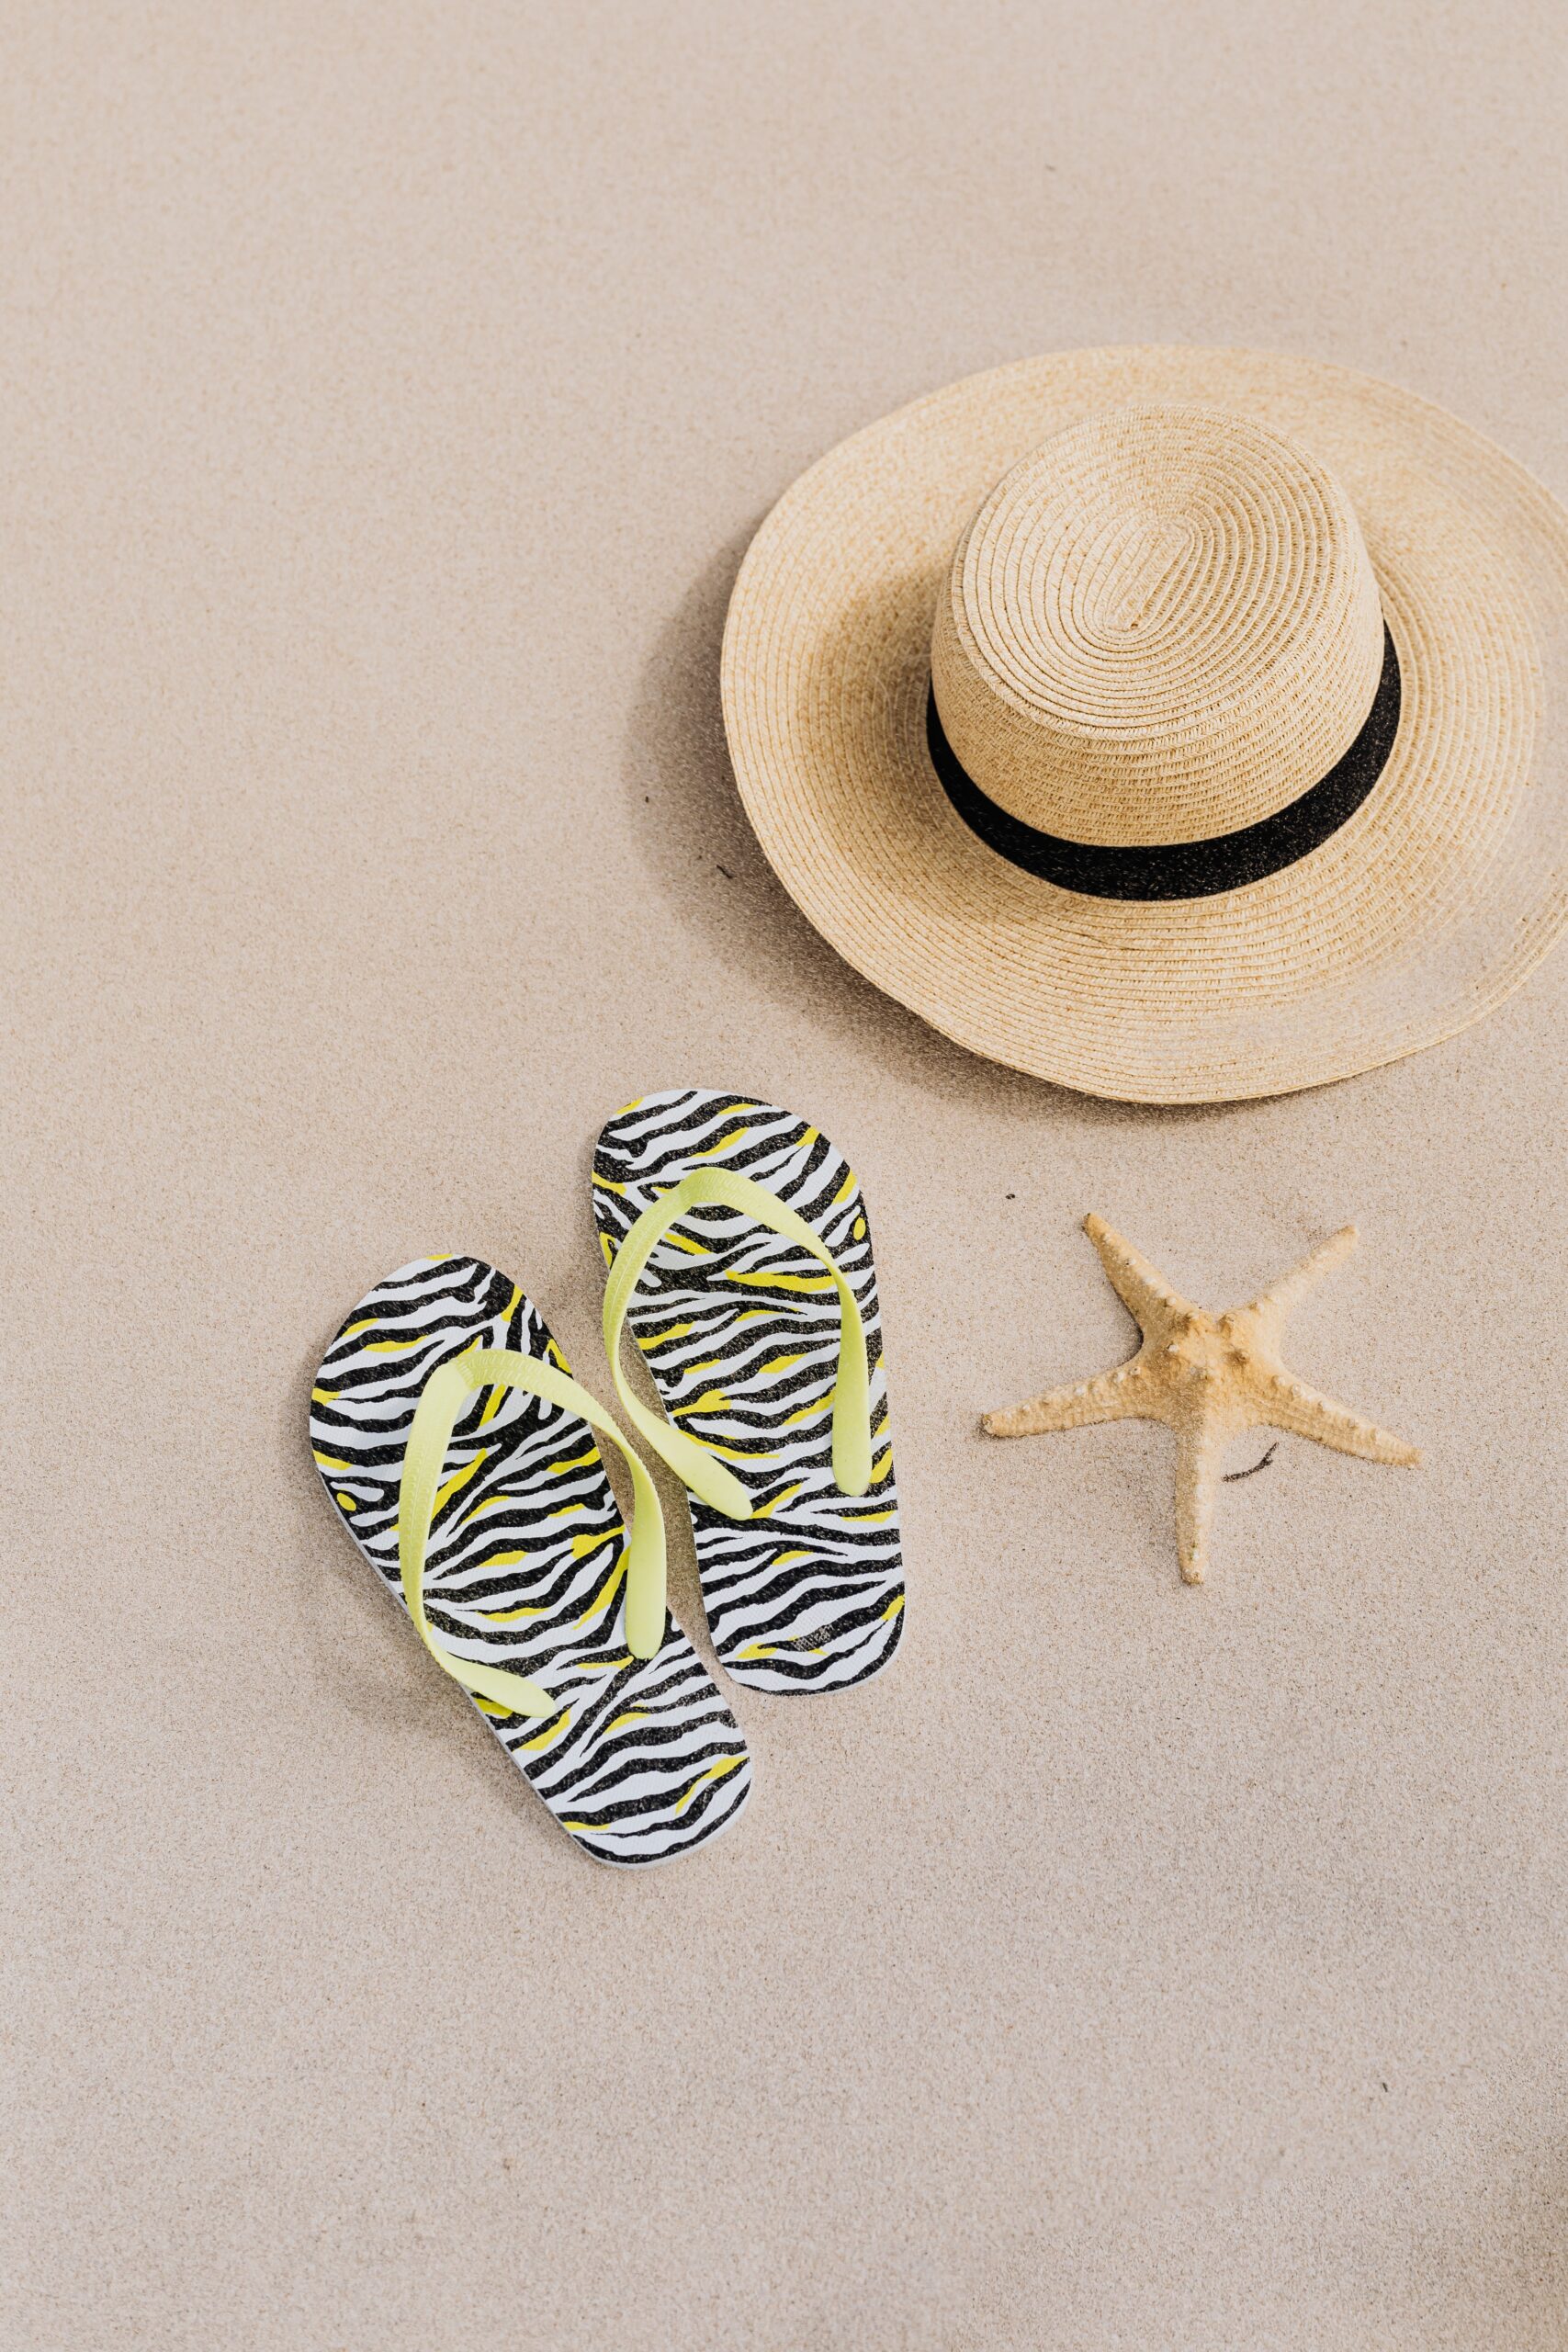 beach-hat-flip-flops-and-a-starfish-on-the-sand